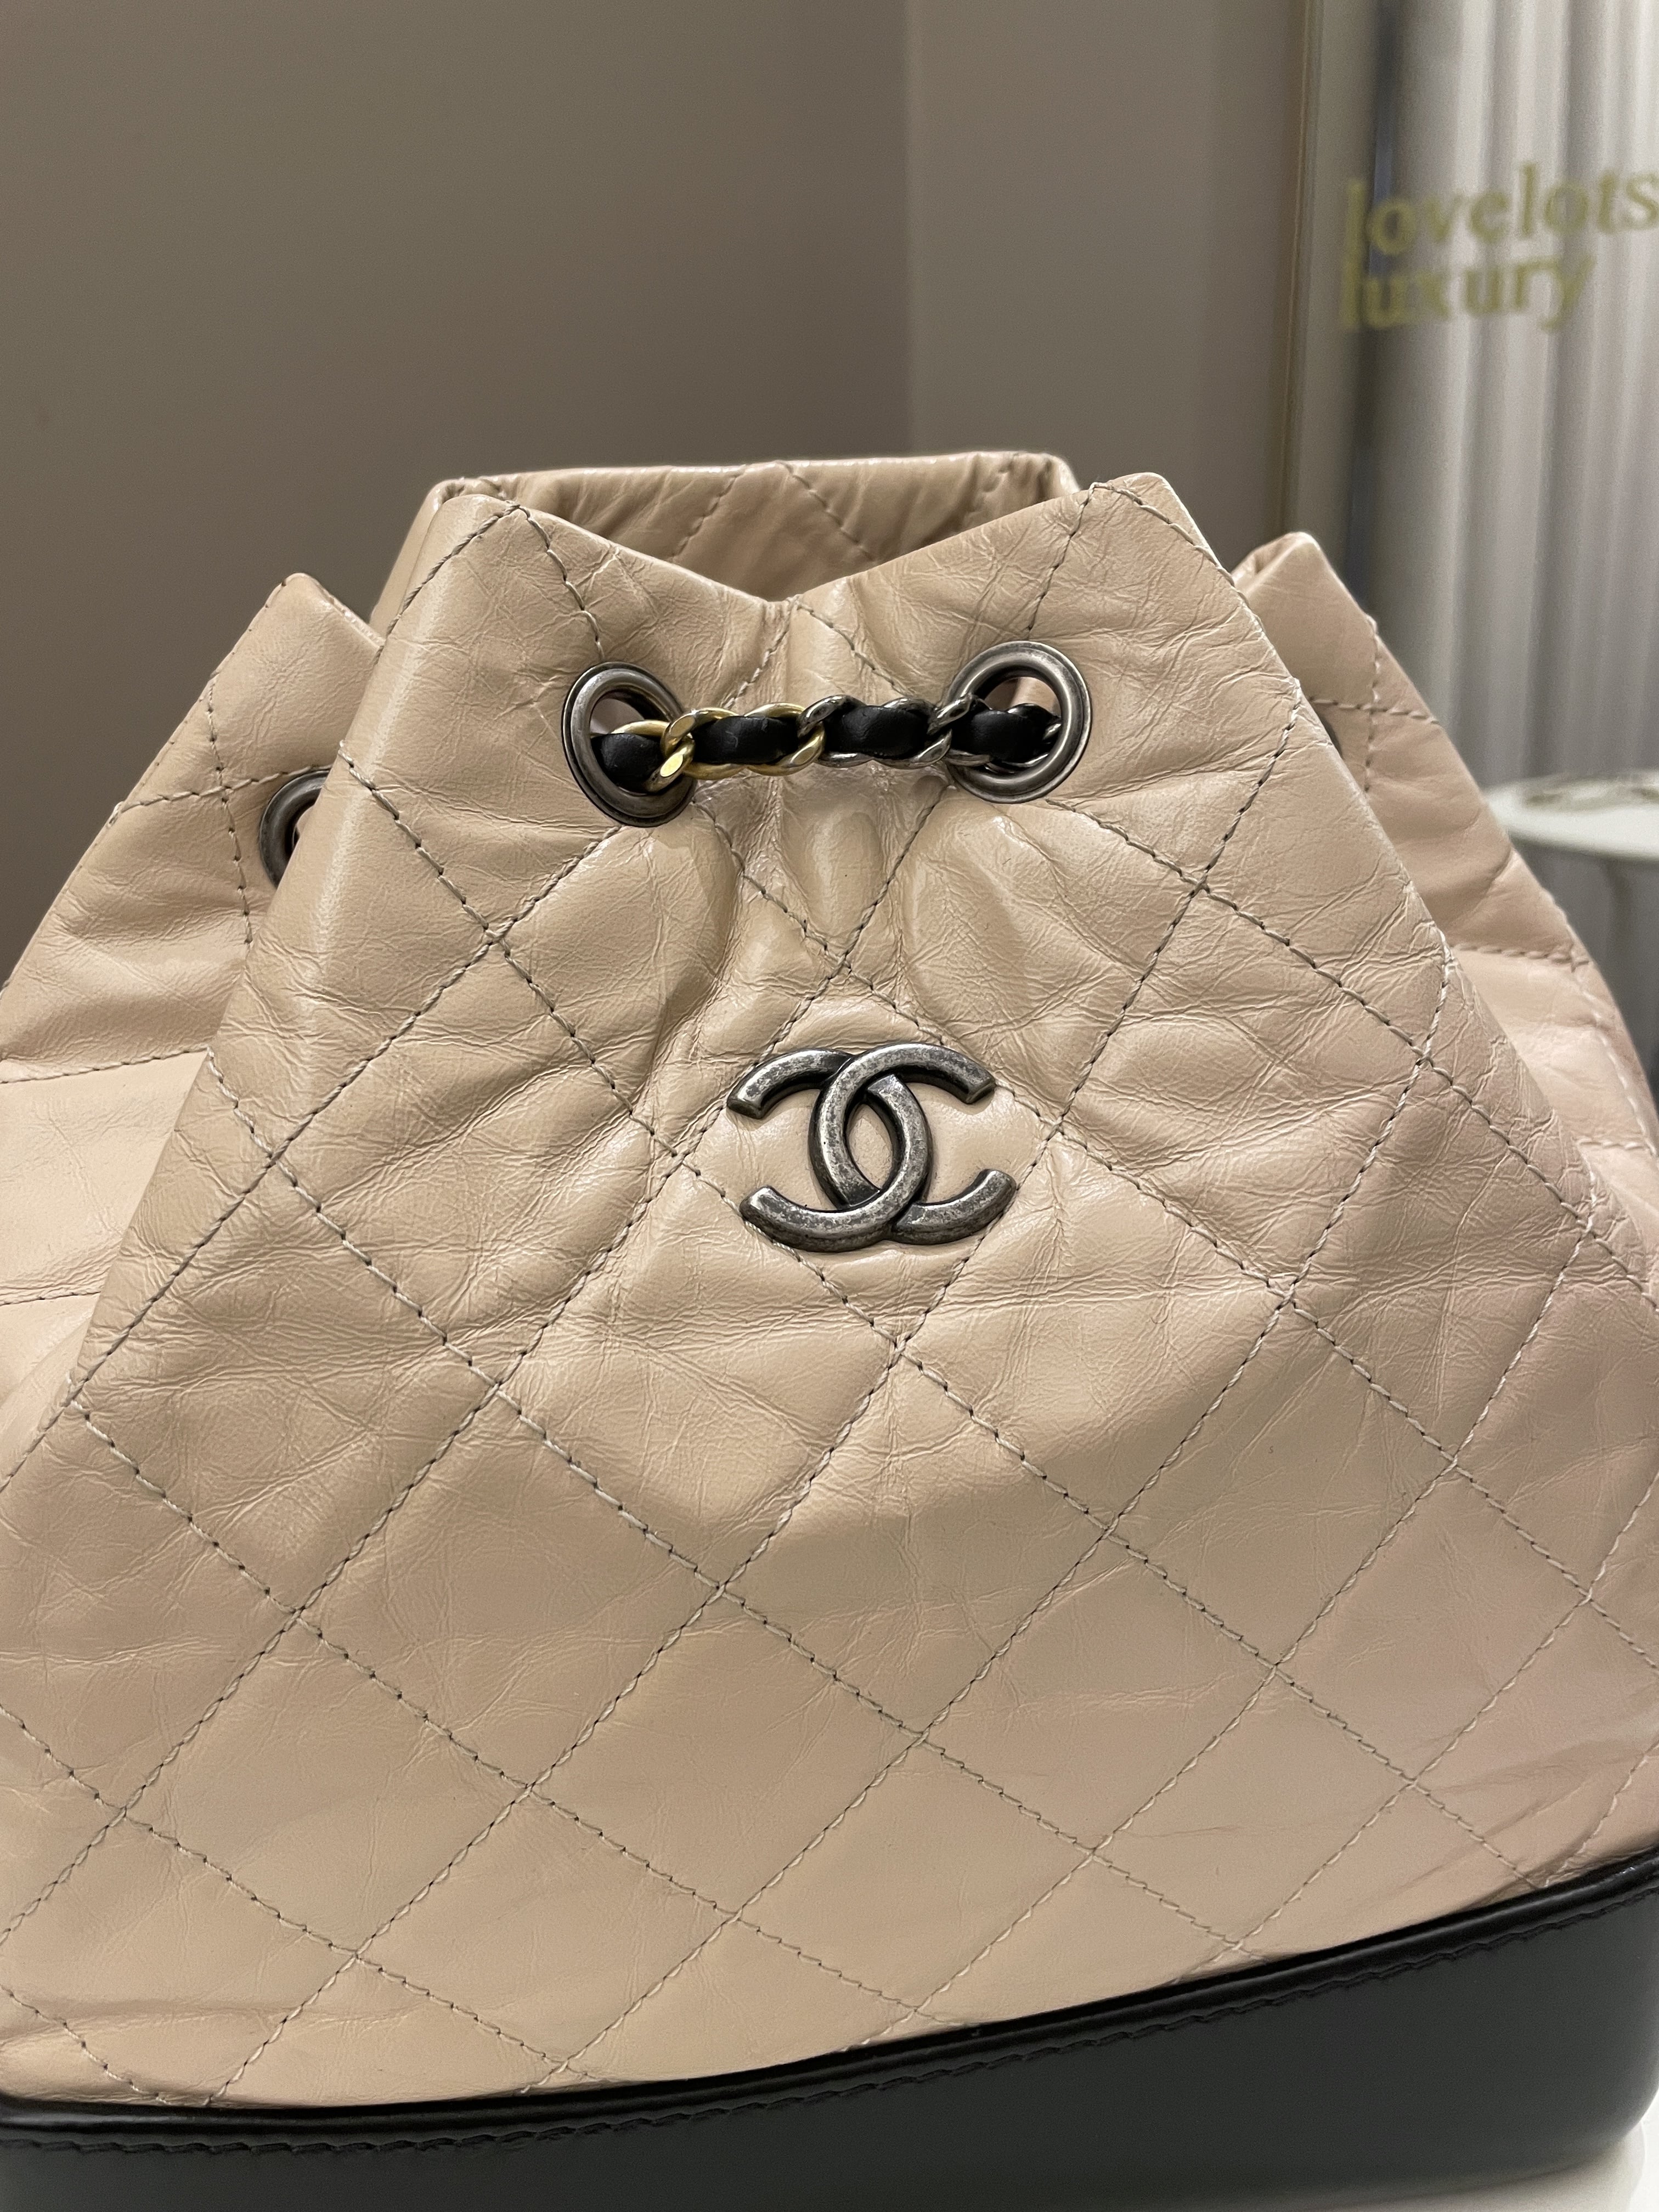 Review of the Chanel Gabrielle Backpack Small Black Aged Calfskin